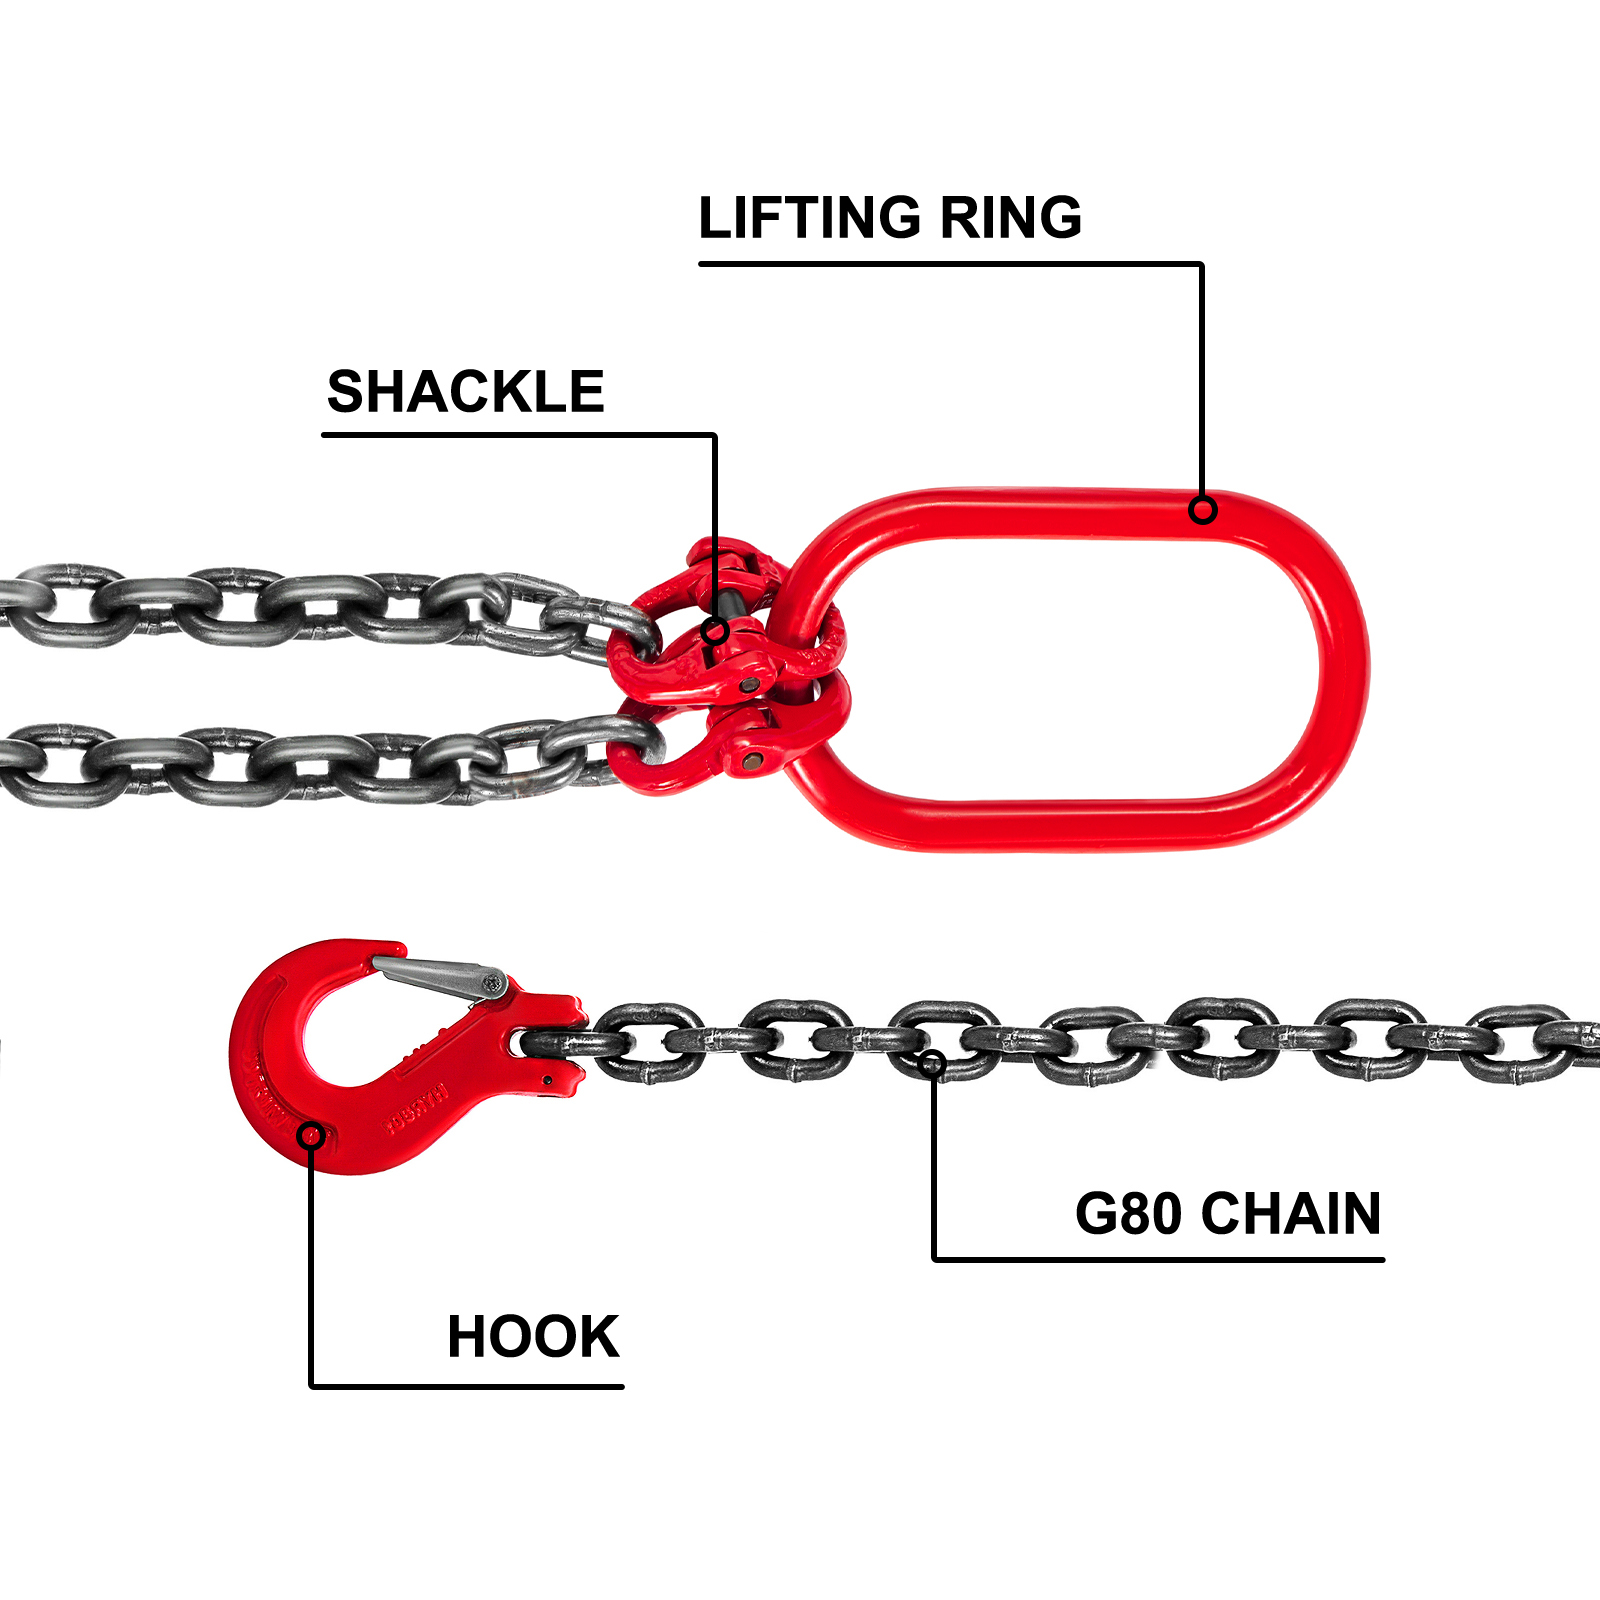 Mophorn Chain Sling, 3/8 Inch X 5 Ft Double Leg Lifting Chains With Grab Hooks, 4 Ton Capacity Lifting Slings, G80 Alloy Steel Double Leg Slings